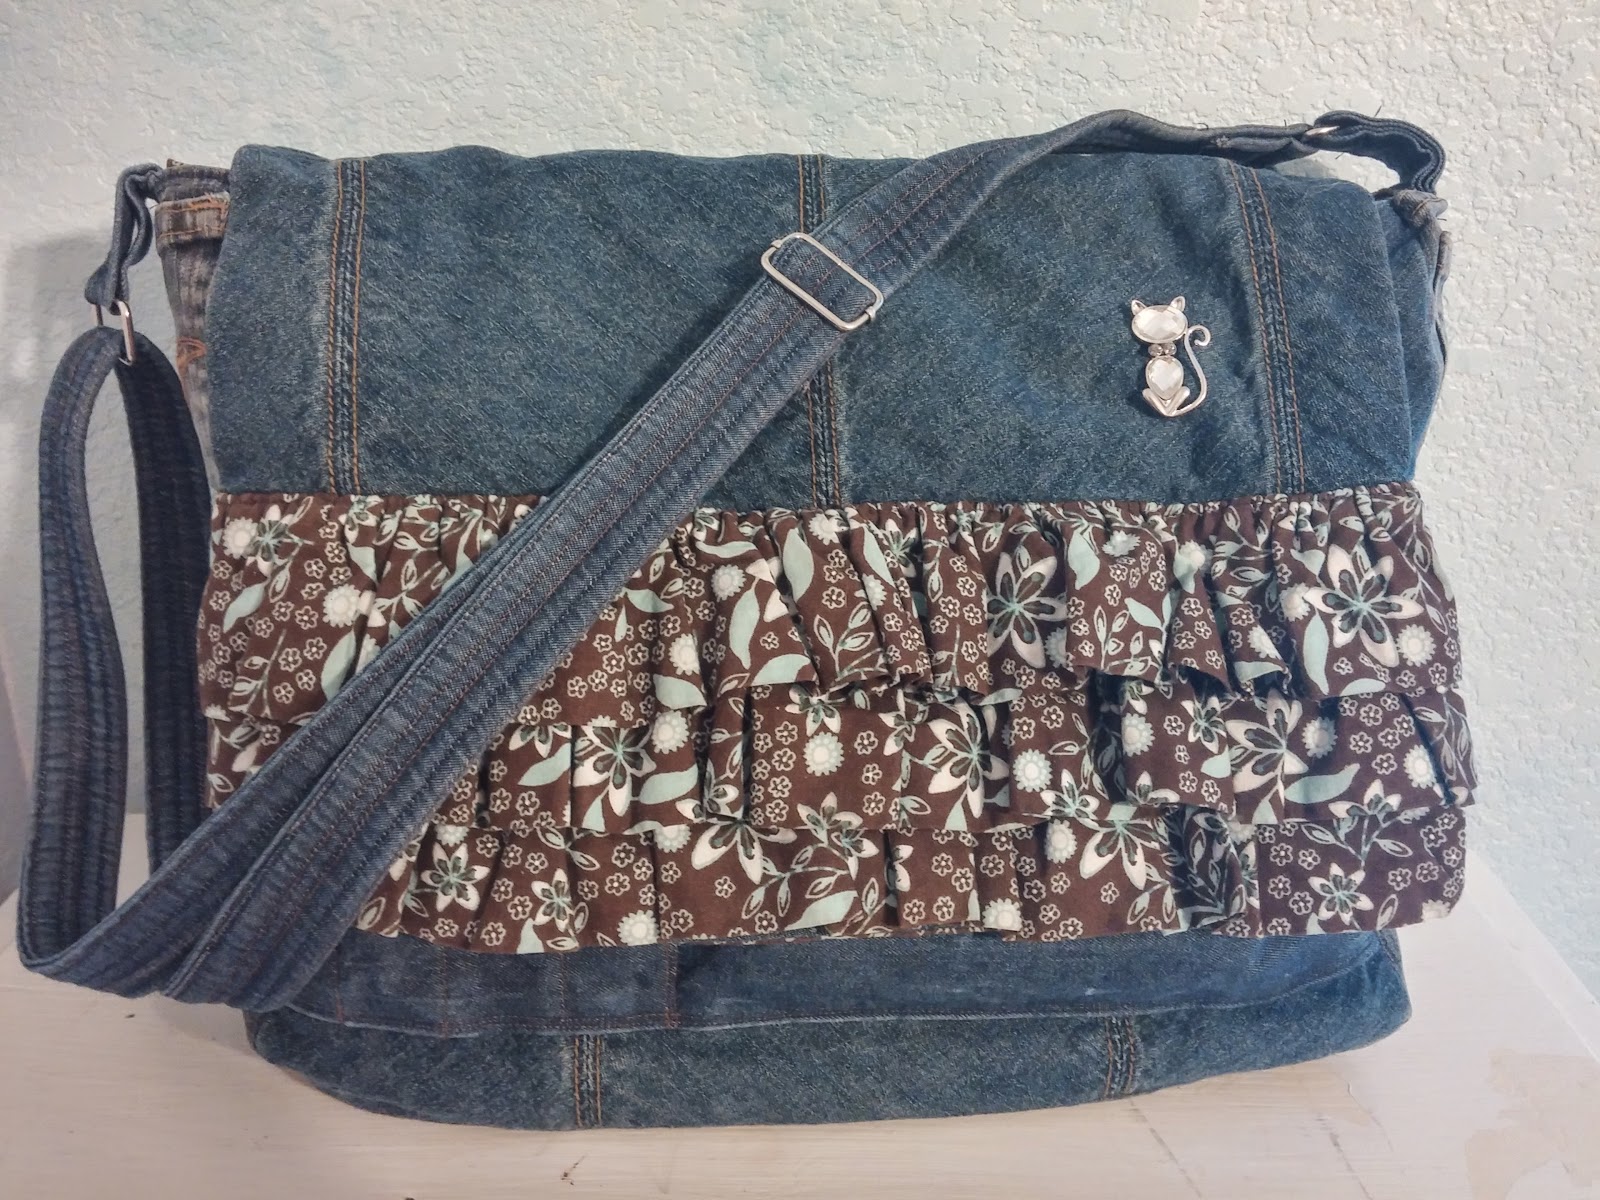 My Sewing Projects (Catchy, I know,right?): Messenger Bags